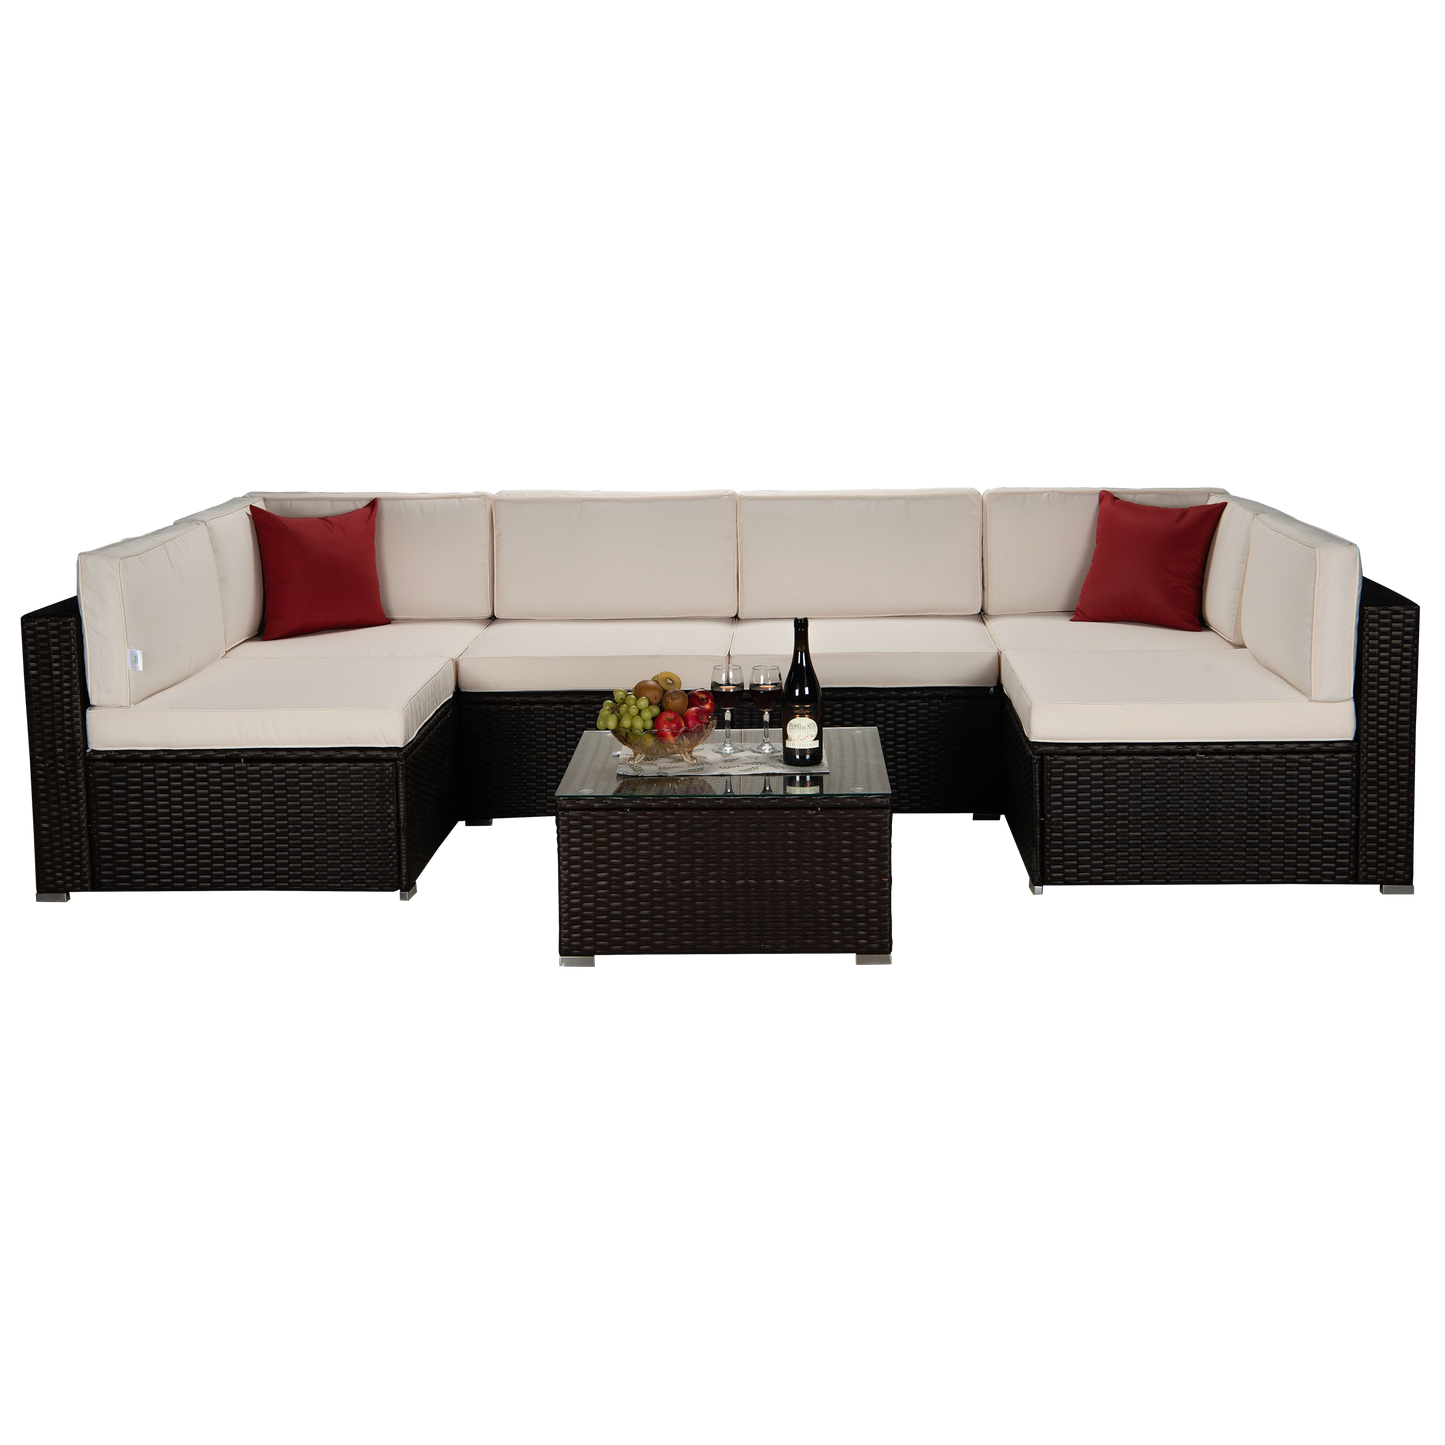 Outdoor Garden Patio Furniture 7-Piece Brown PE Rattan Wicker Sectional Beige Cushioned Sofa Sets with 2 Red Pillows